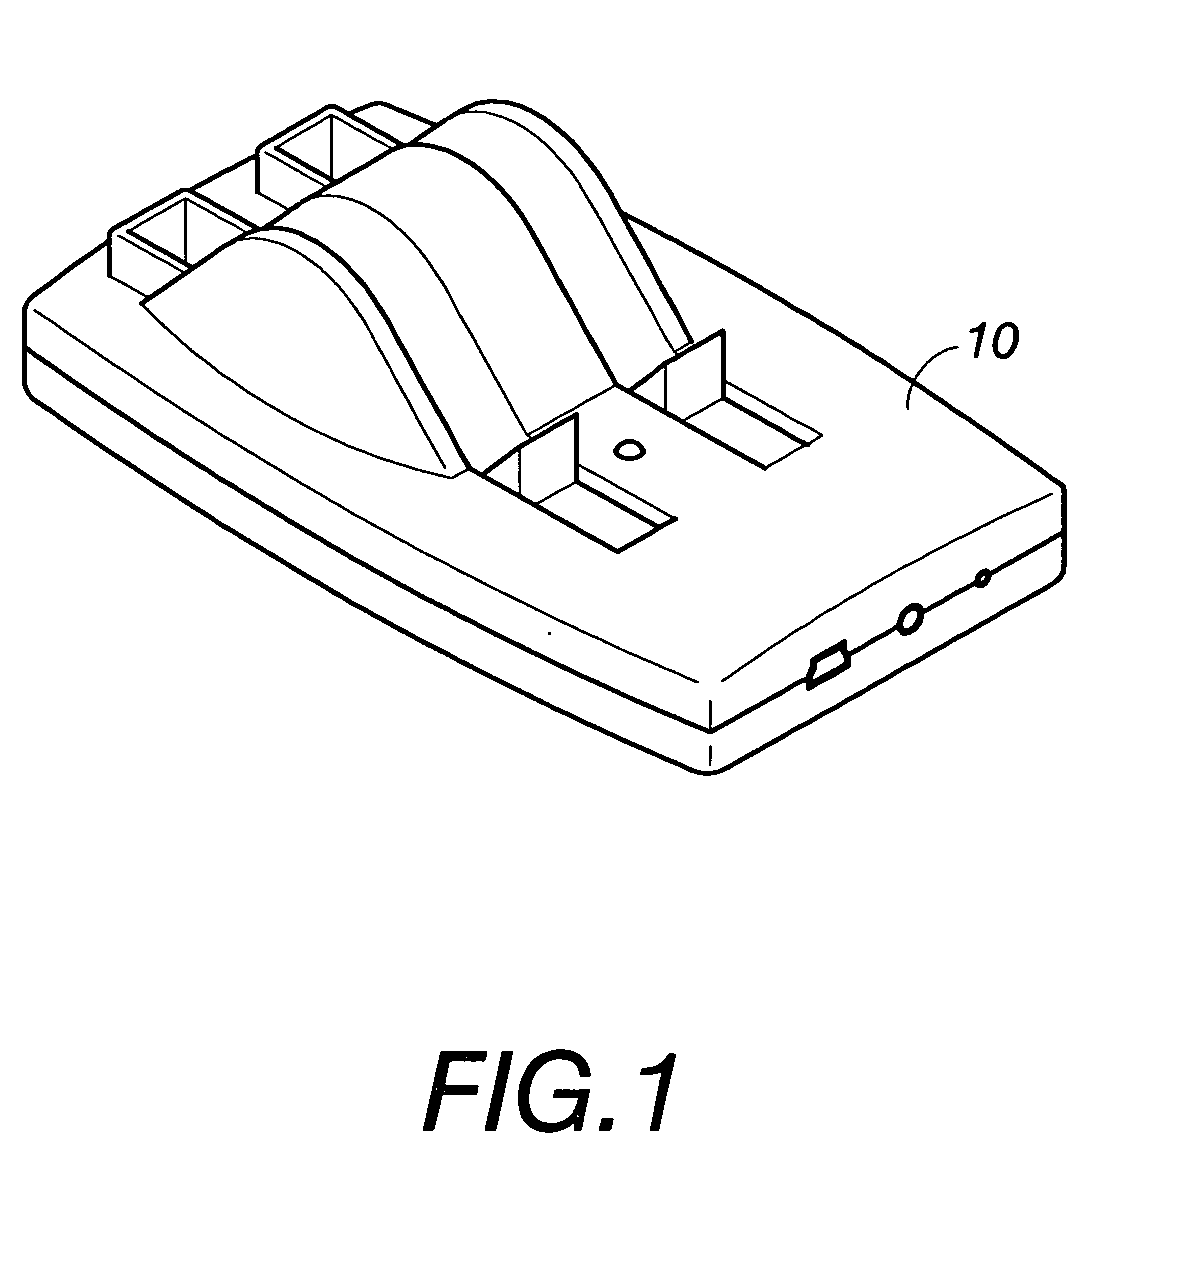 Composite charging cradle for rechargeable battery